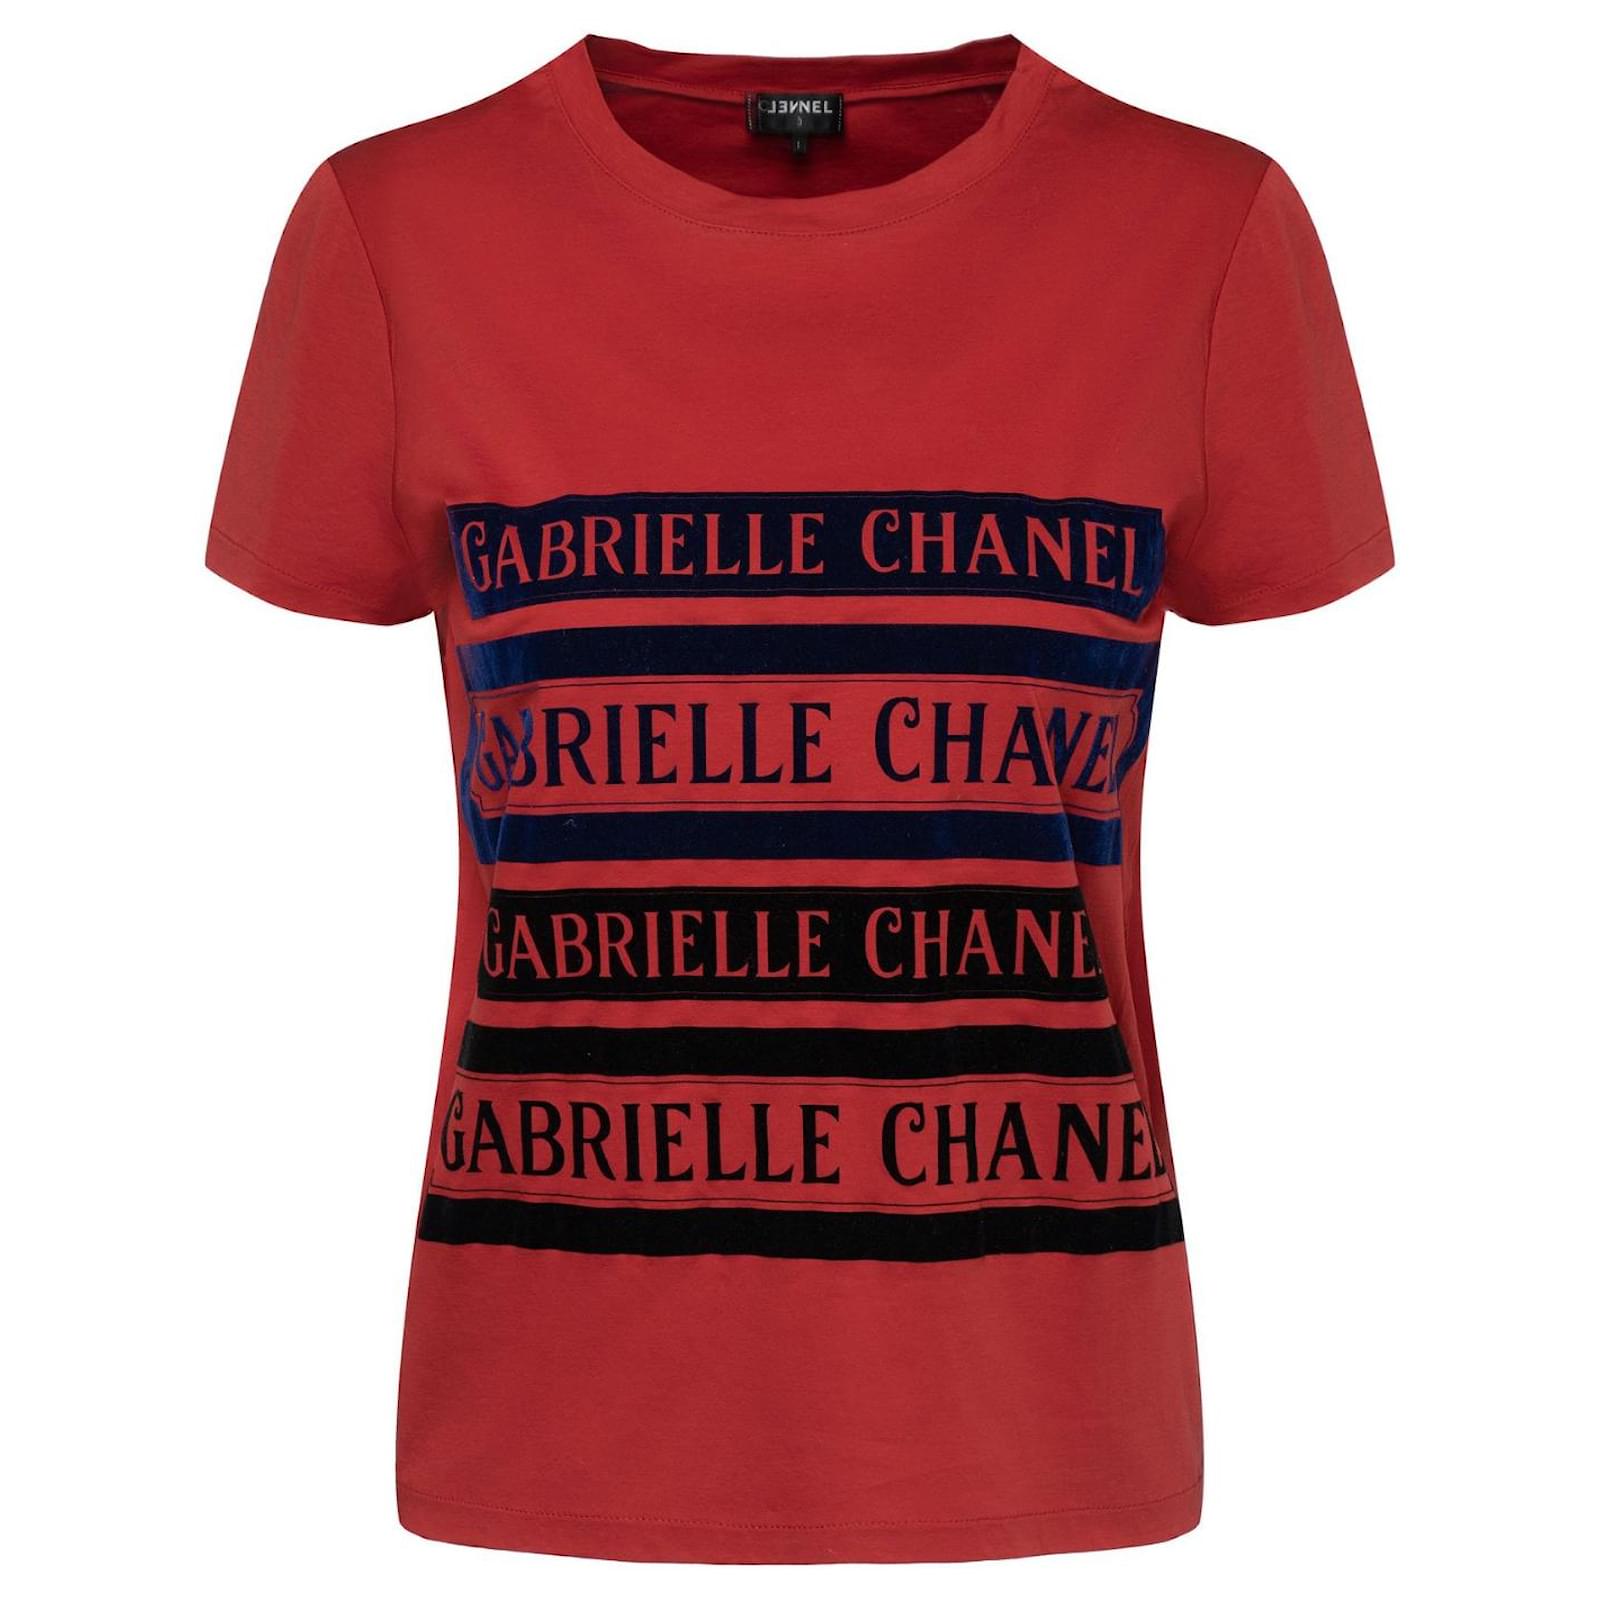 COCO CHANEL T-Shirt on sale in Cameroon with the possibility of